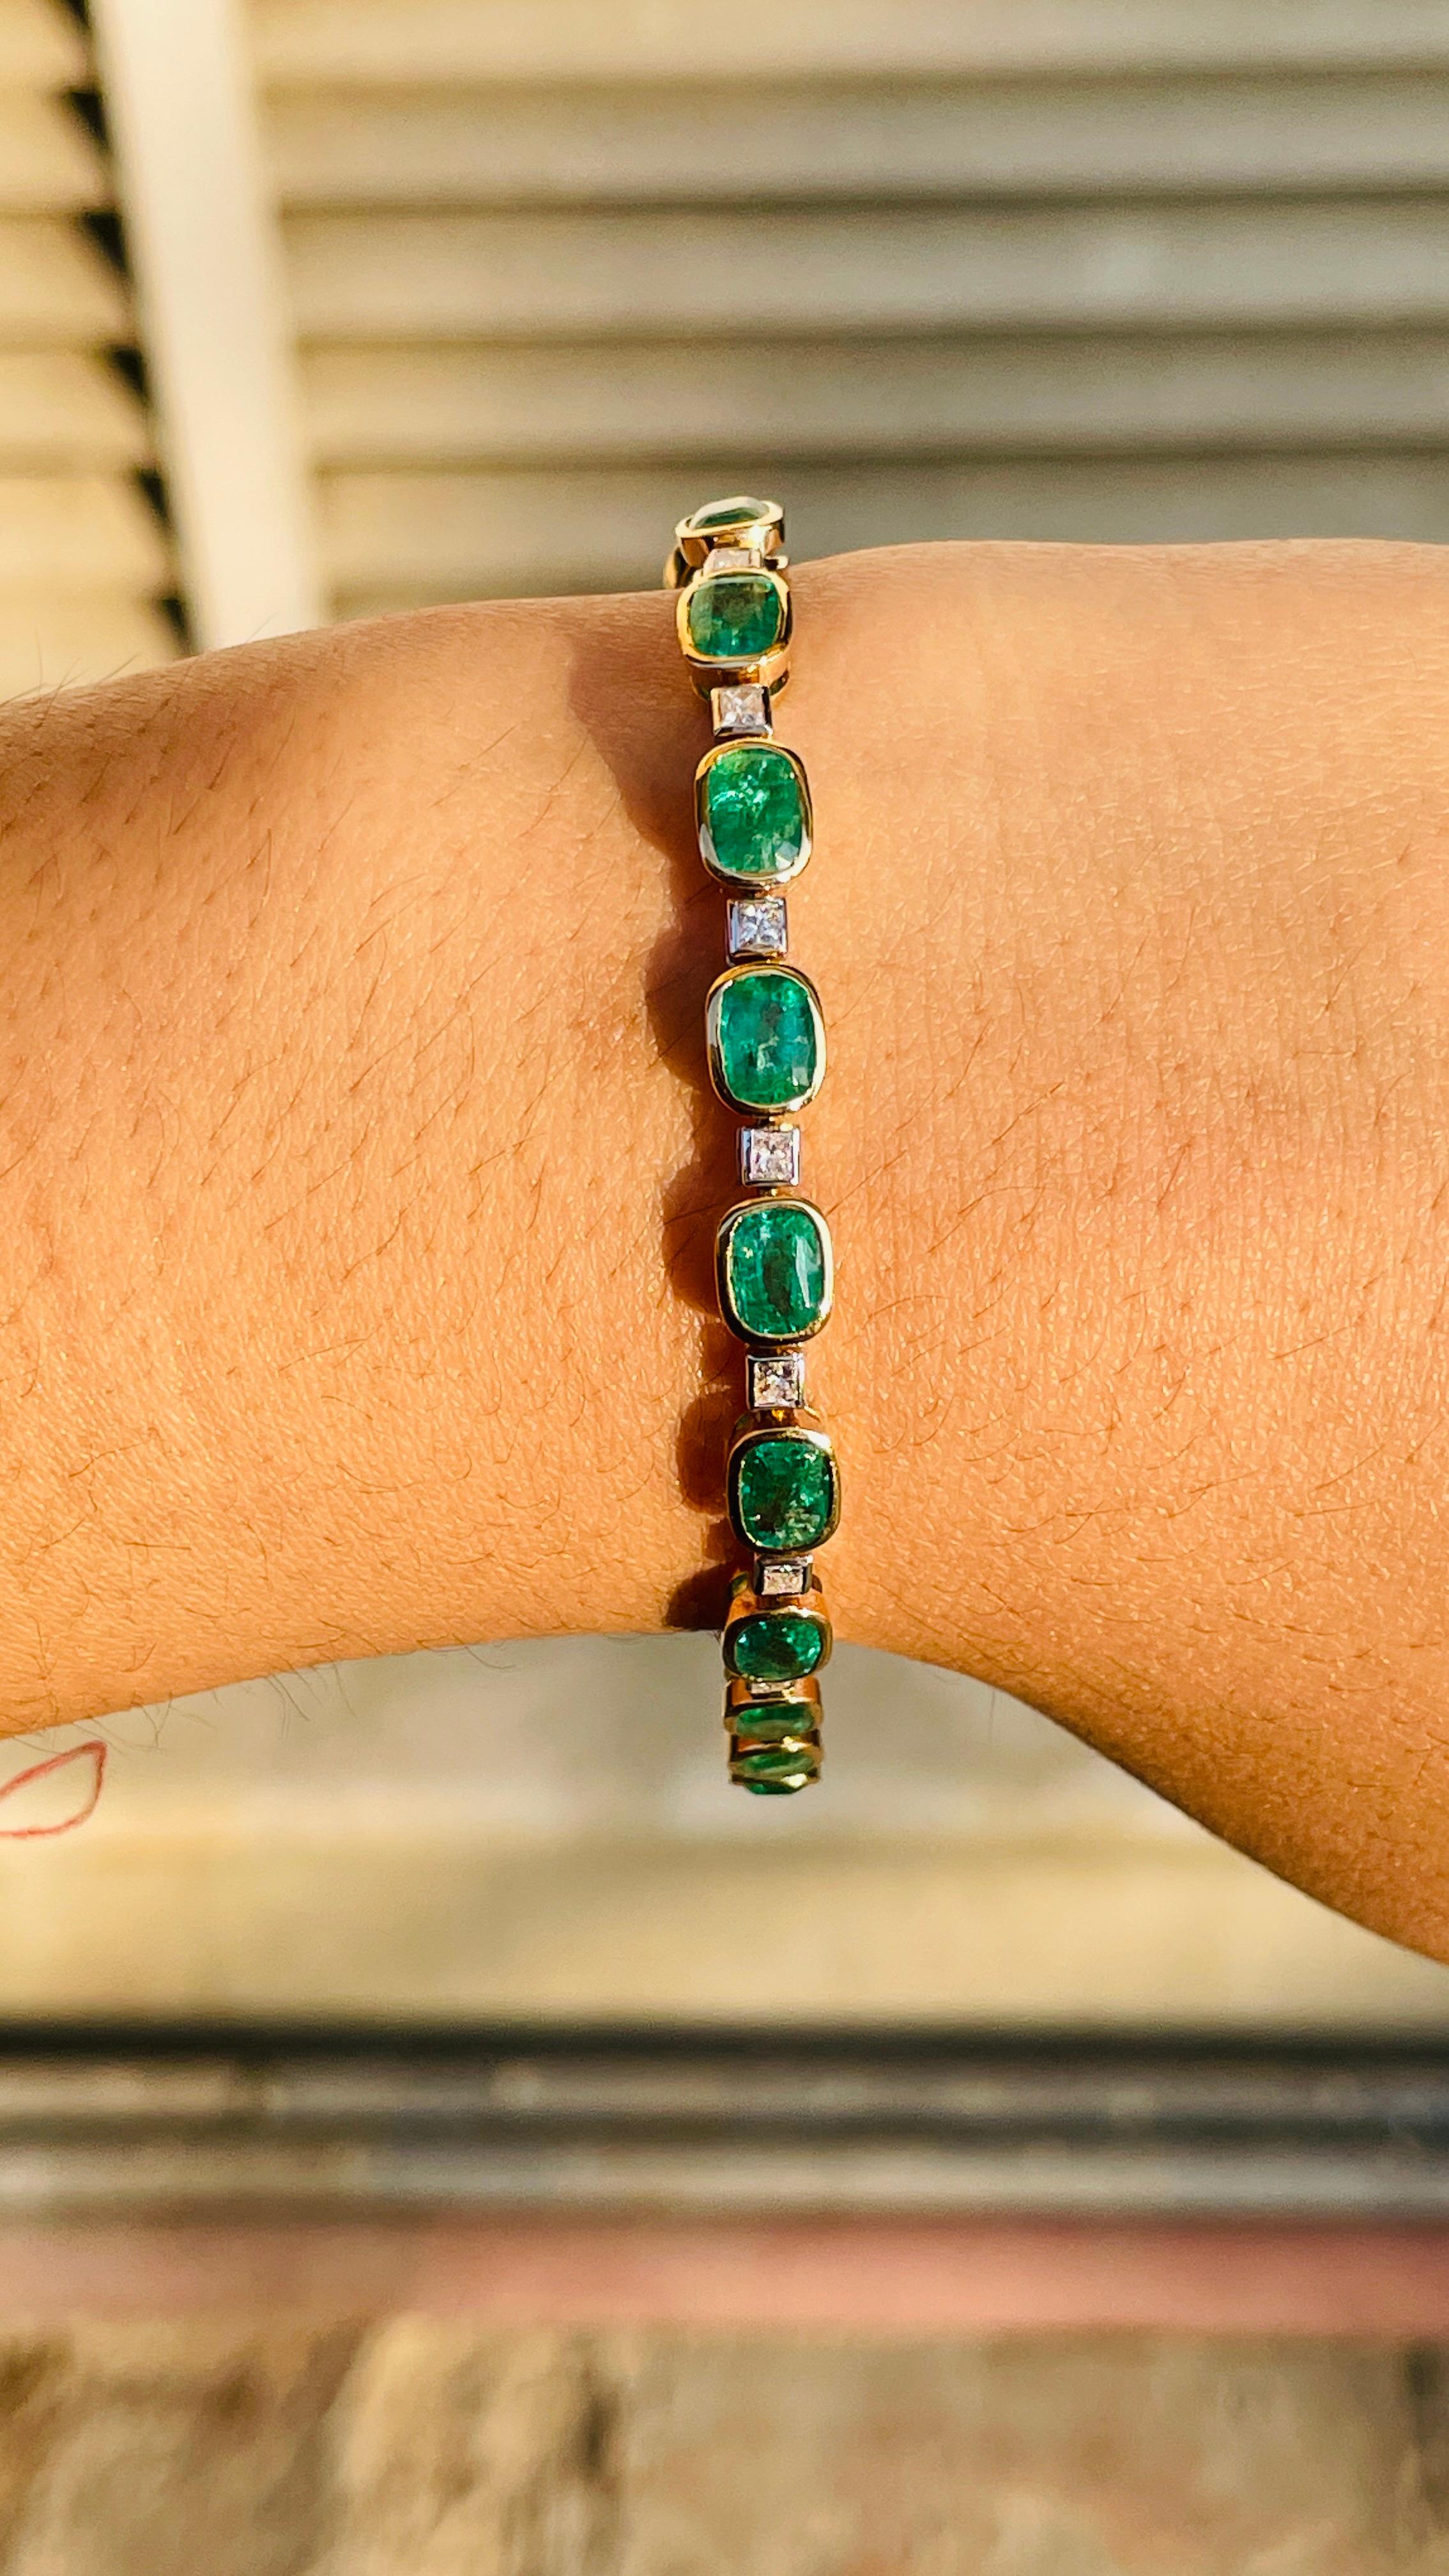 Emerald and Diamond bracelet in 18K Gold. It has a perfect cushion cut gemstone to make you stand out on any occasion or an event.
A tennis bracelet is an essential piece of jewelry when it comes to your wedding day. The sleek and elegant style